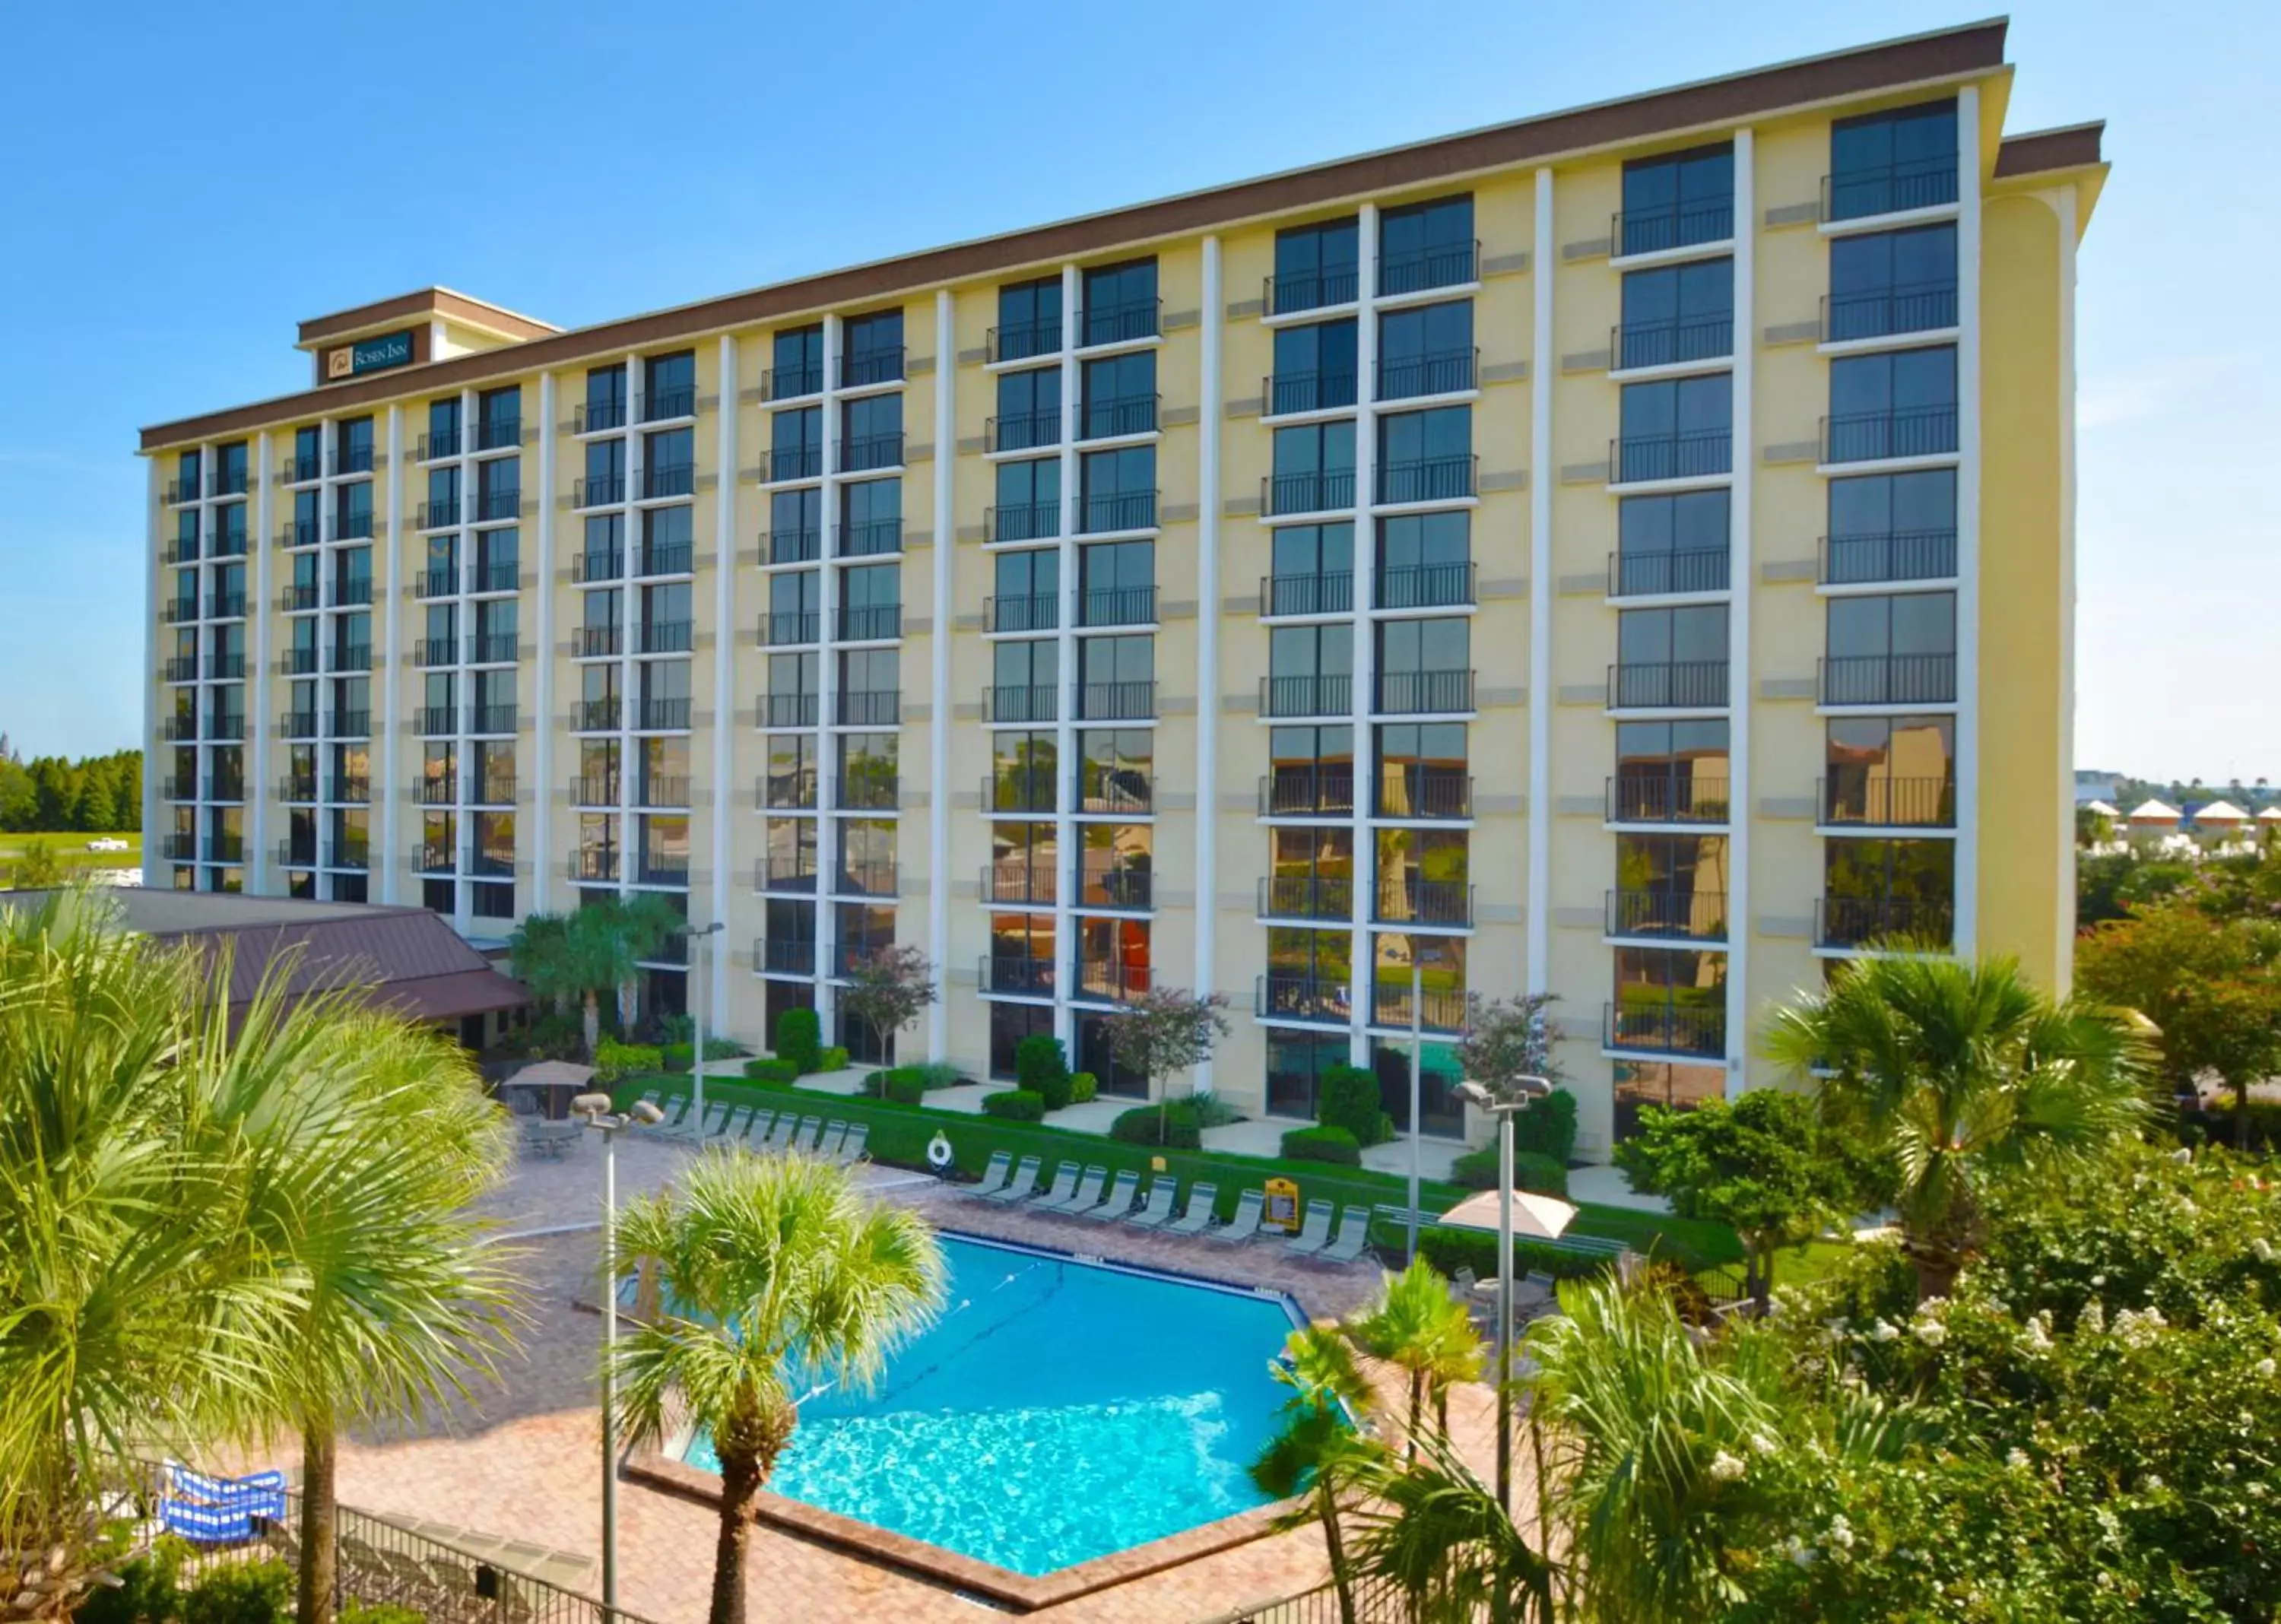 Property building, Pool View in Rosen Inn Closest to Universal